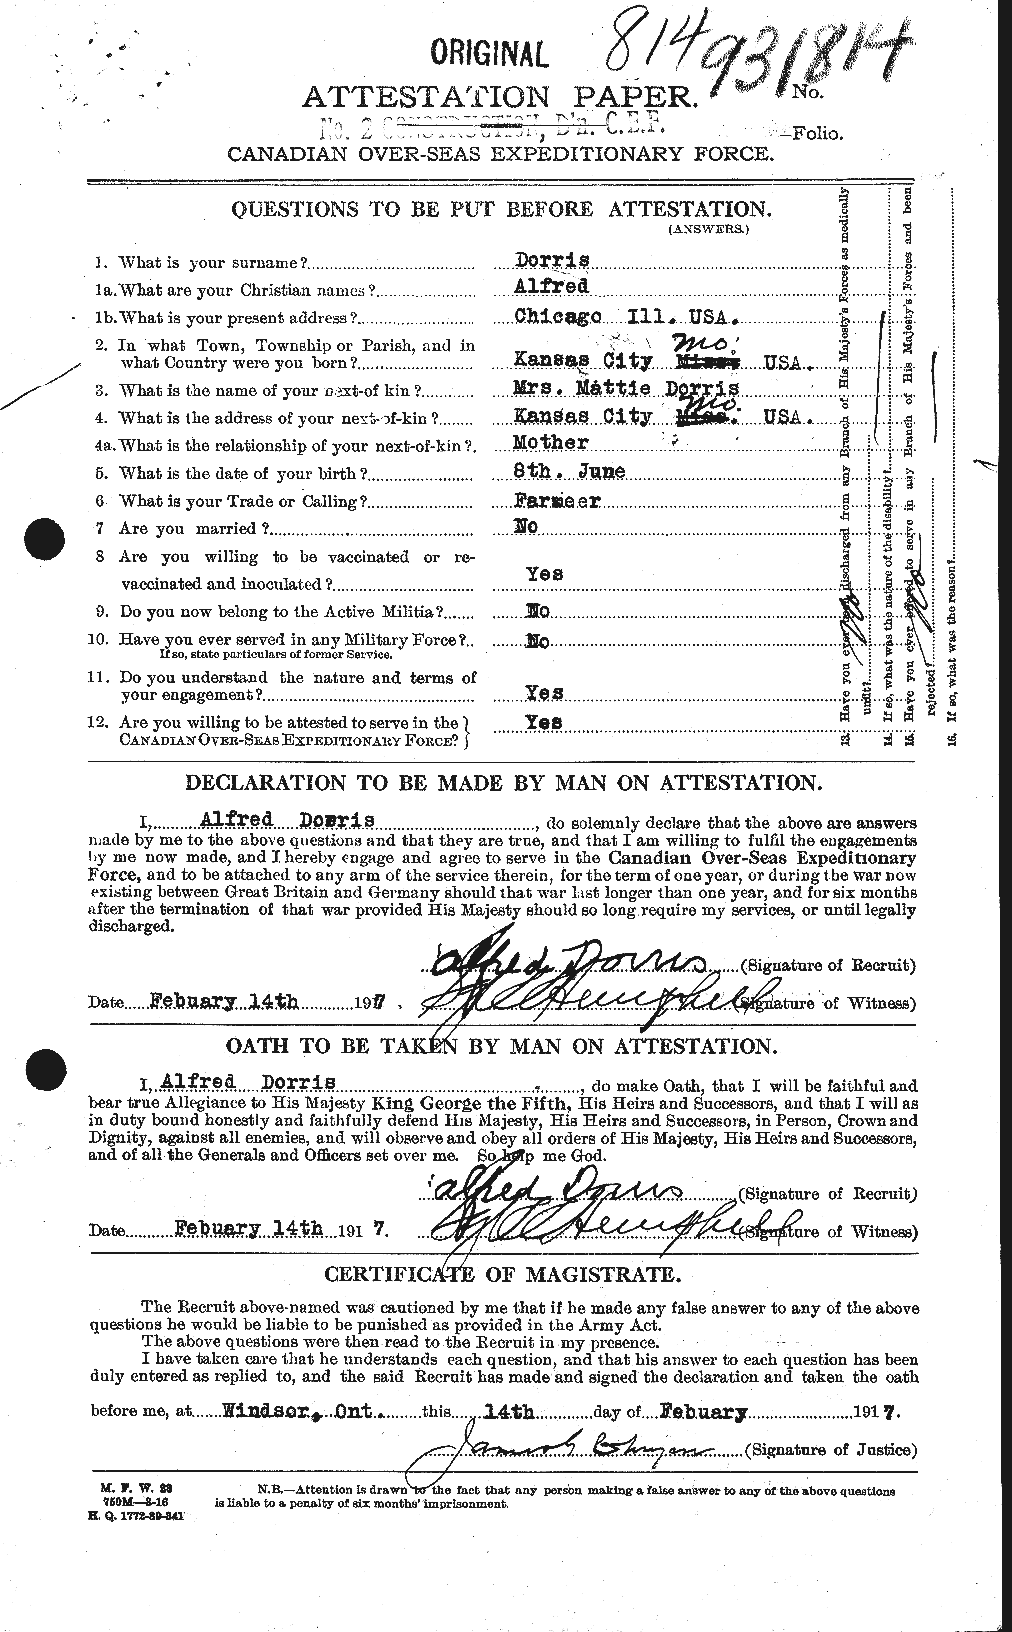 Personnel Records of the First World War - CEF 291247a